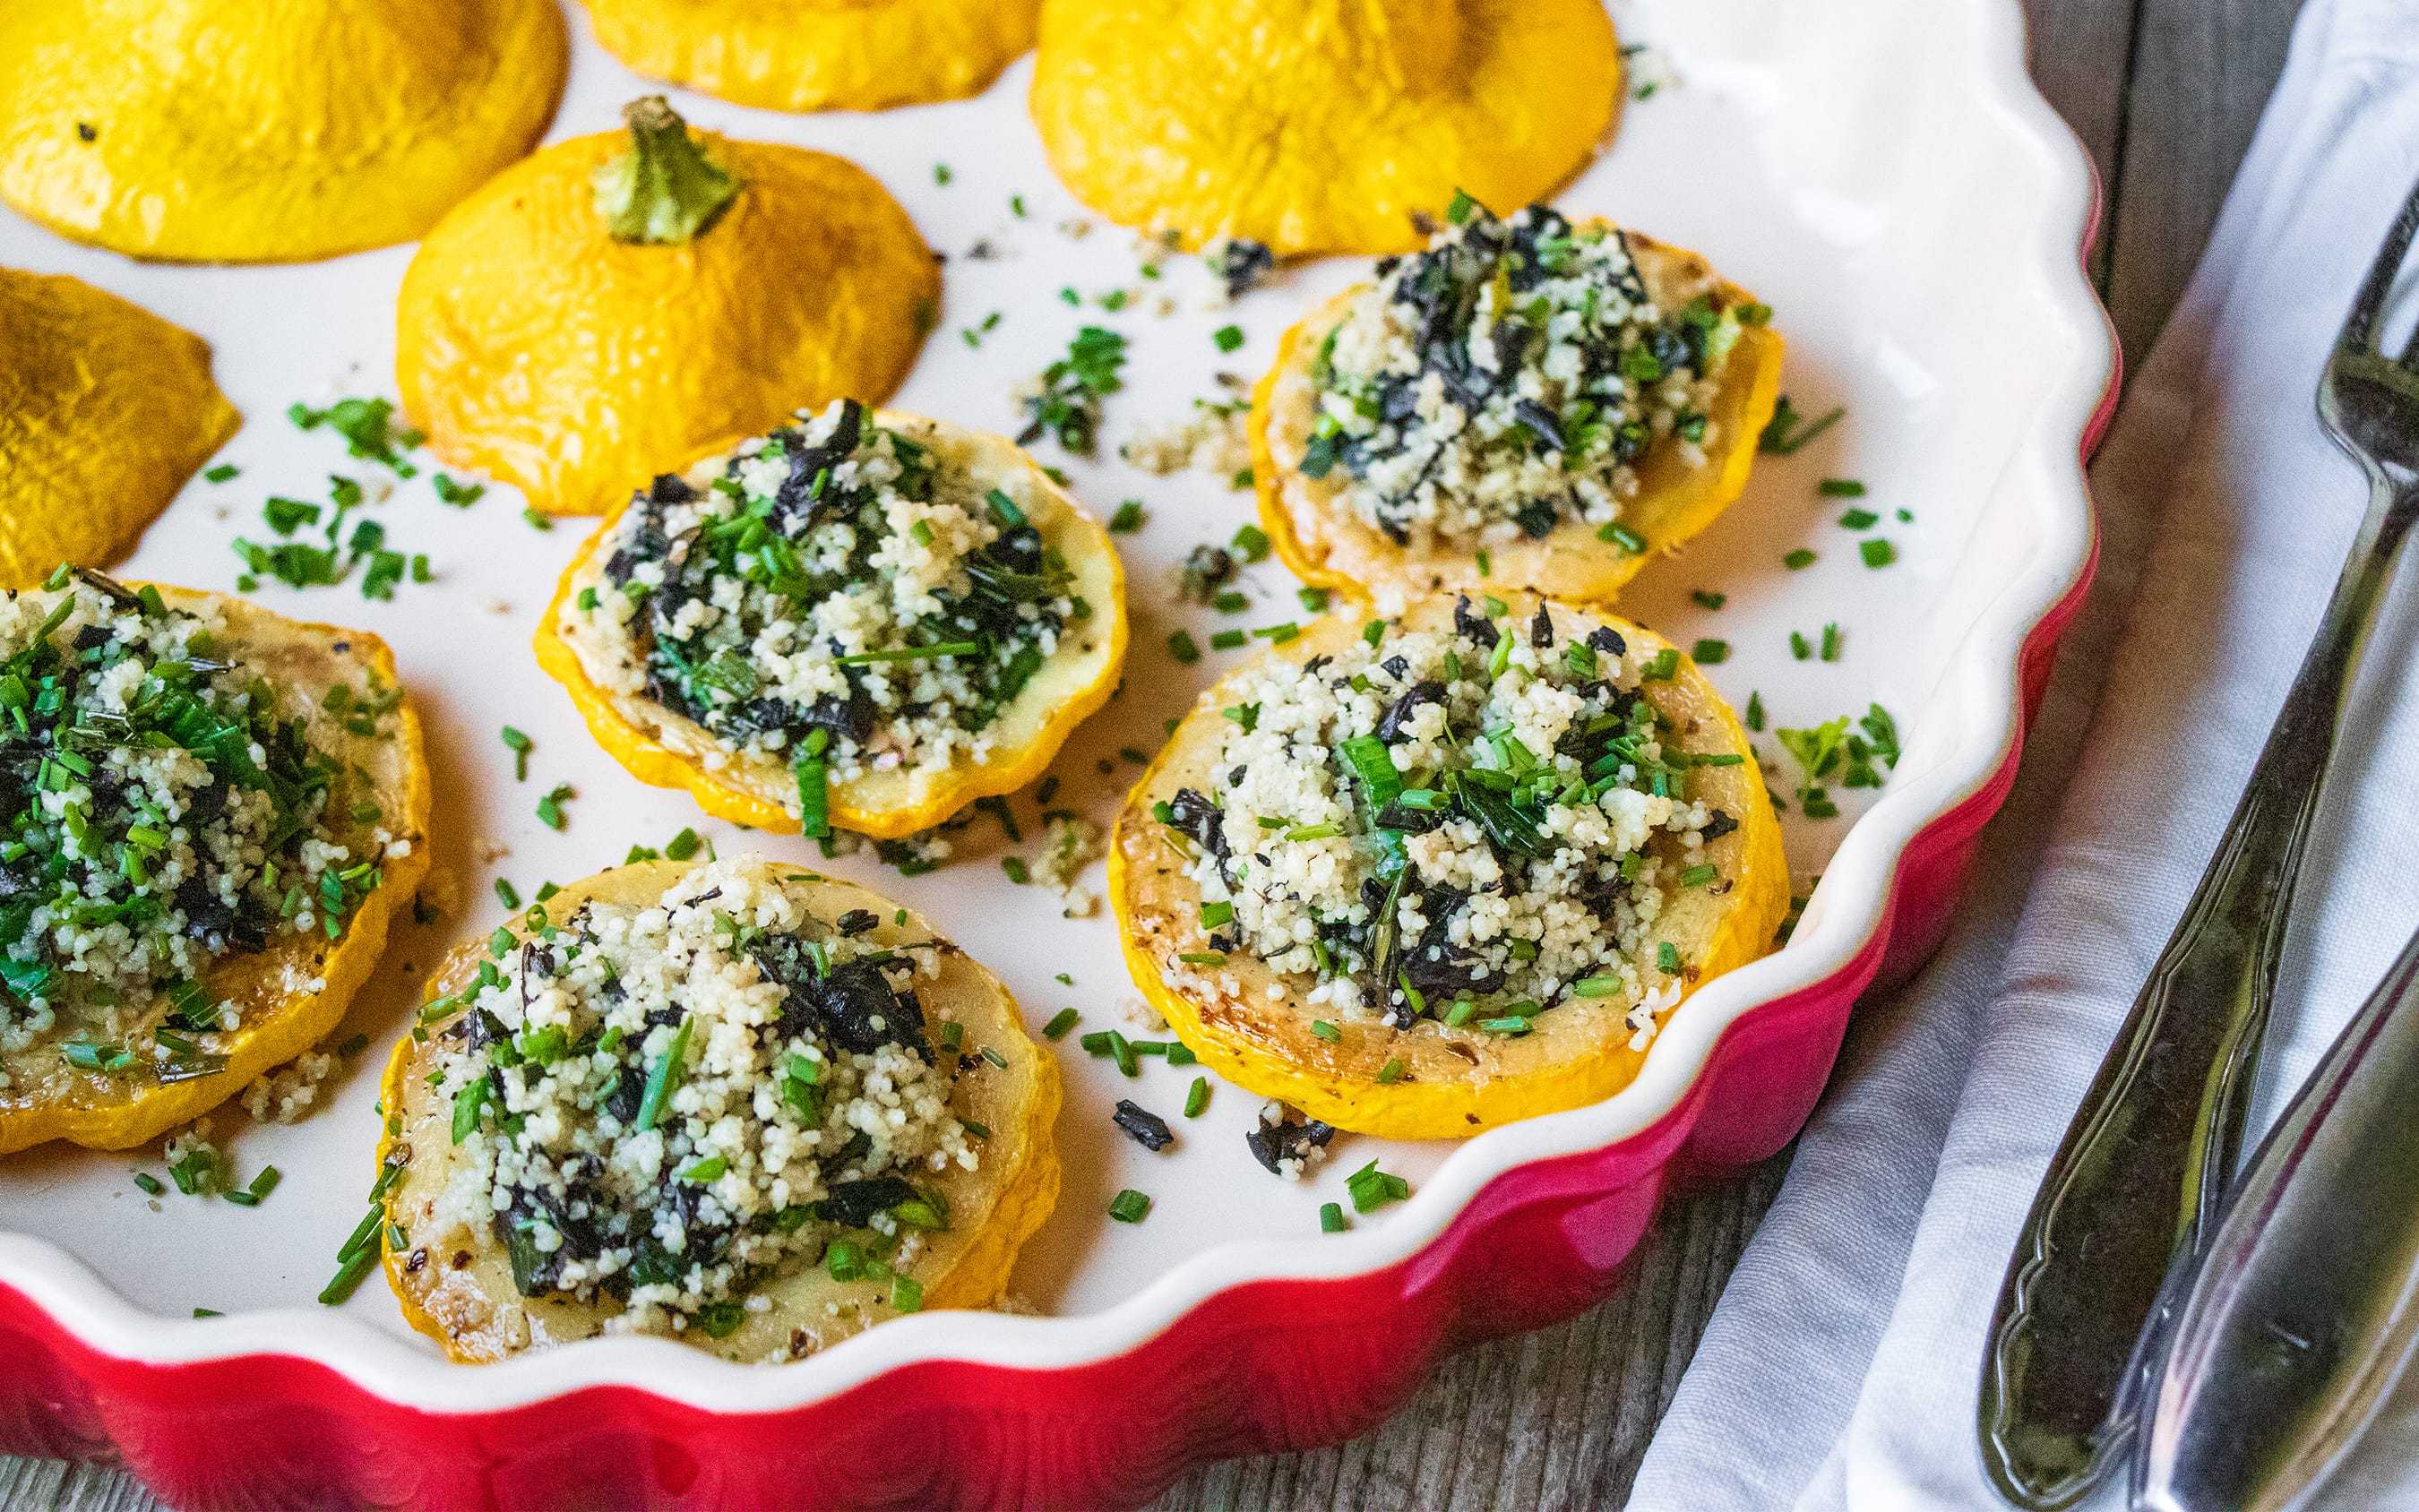 Stuffed Patty Pans with Black Trumpets | Recipe by FUNGIWOMAN